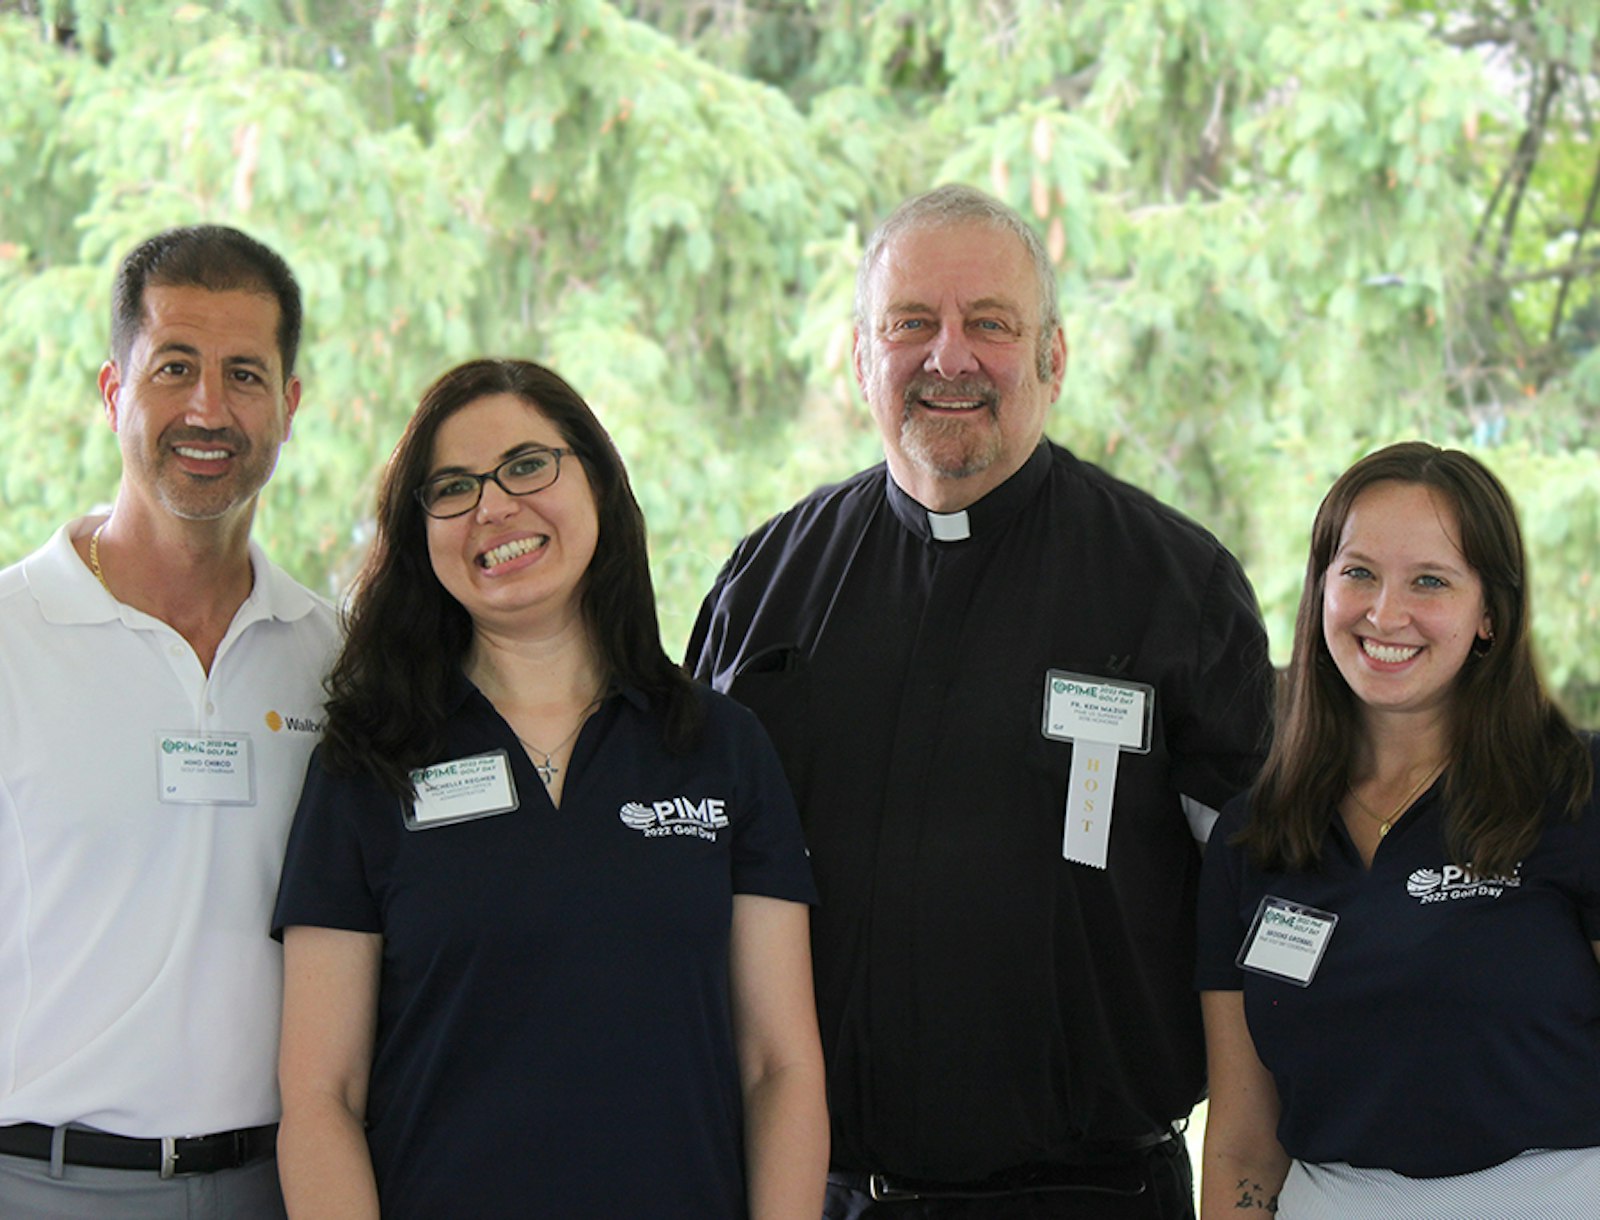 PIME's annual golf day is one of the apostolic society's biggest fundraisers of the year. Pictured left to right at PIME Golf Day chairman Nino Chirco, PIME Mission office administrator Michelle Regner, PIME U.S. Superior Fr. Ken Mazur, and PIME events coordinator Brooke Grobbel.